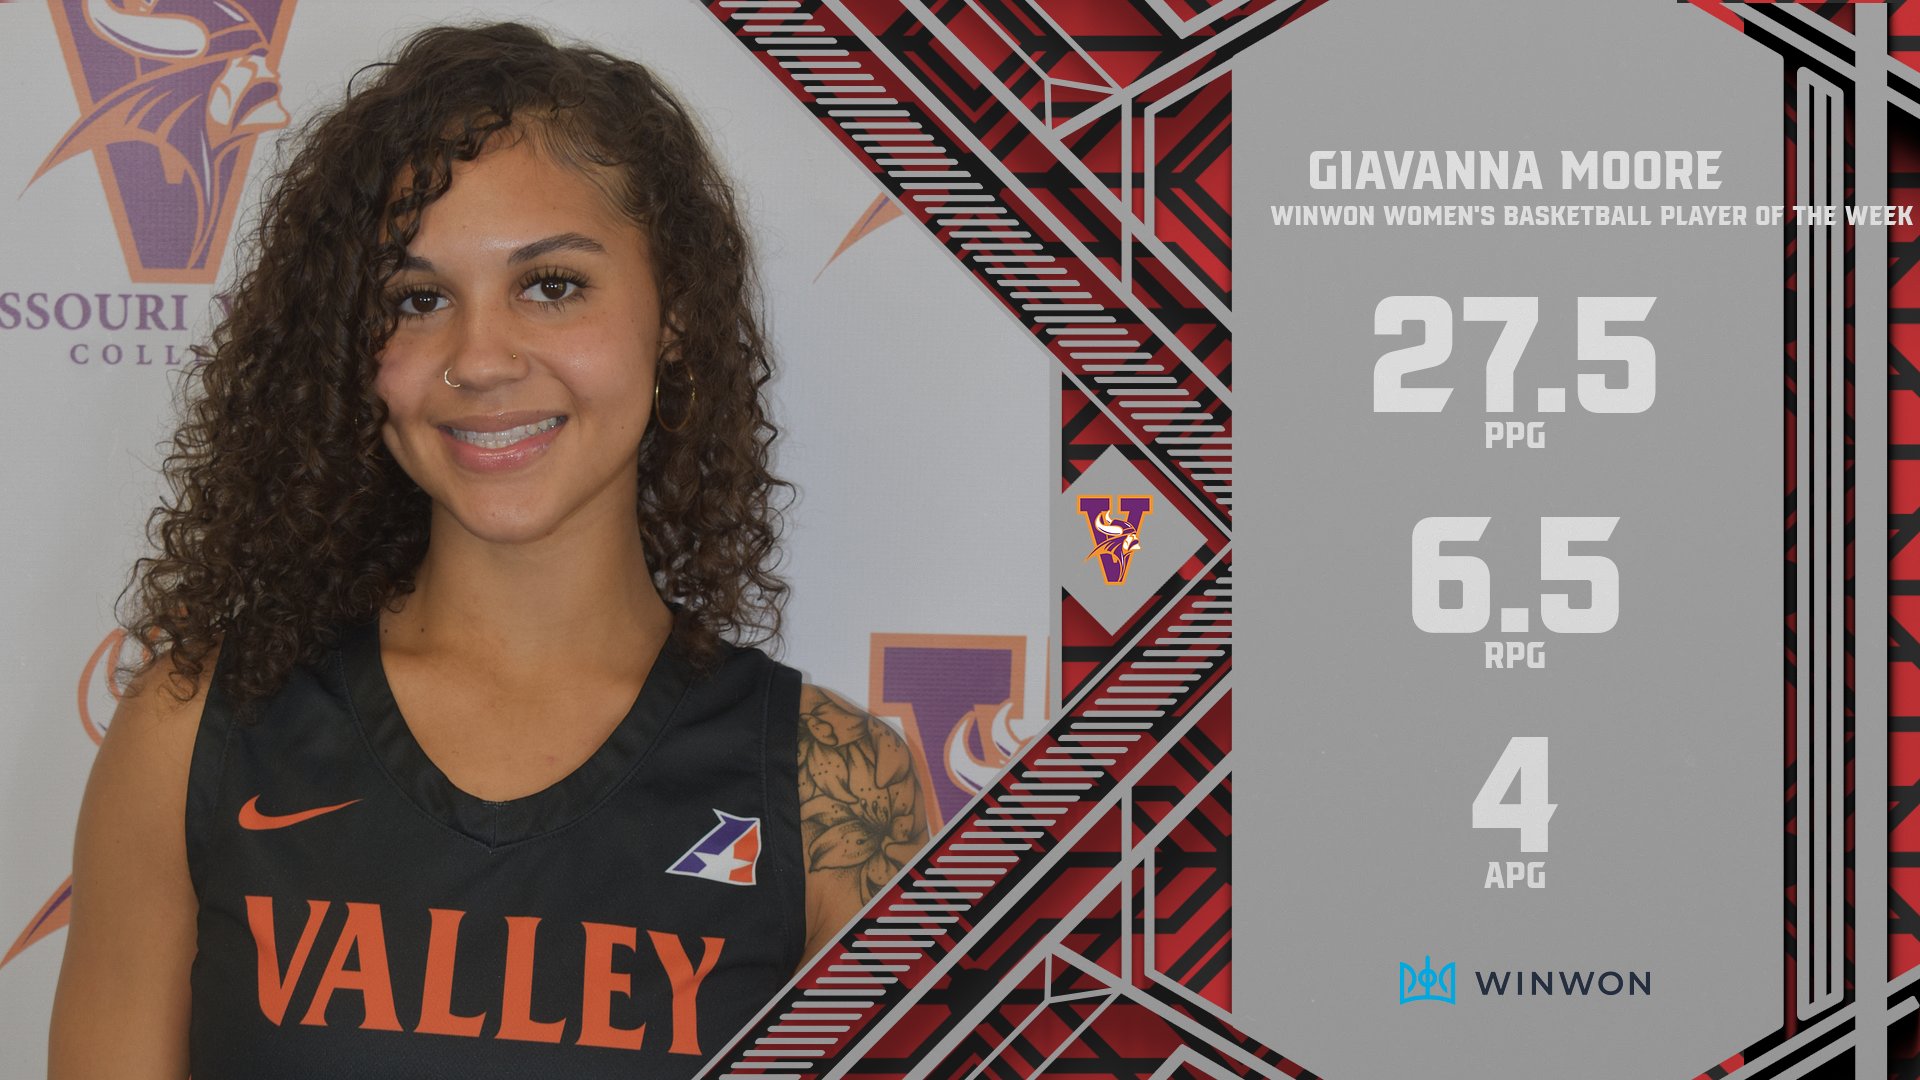 Givanna Moore of Missouri Valley Garners WinWon Women’s Basketball Player of the Week Honors